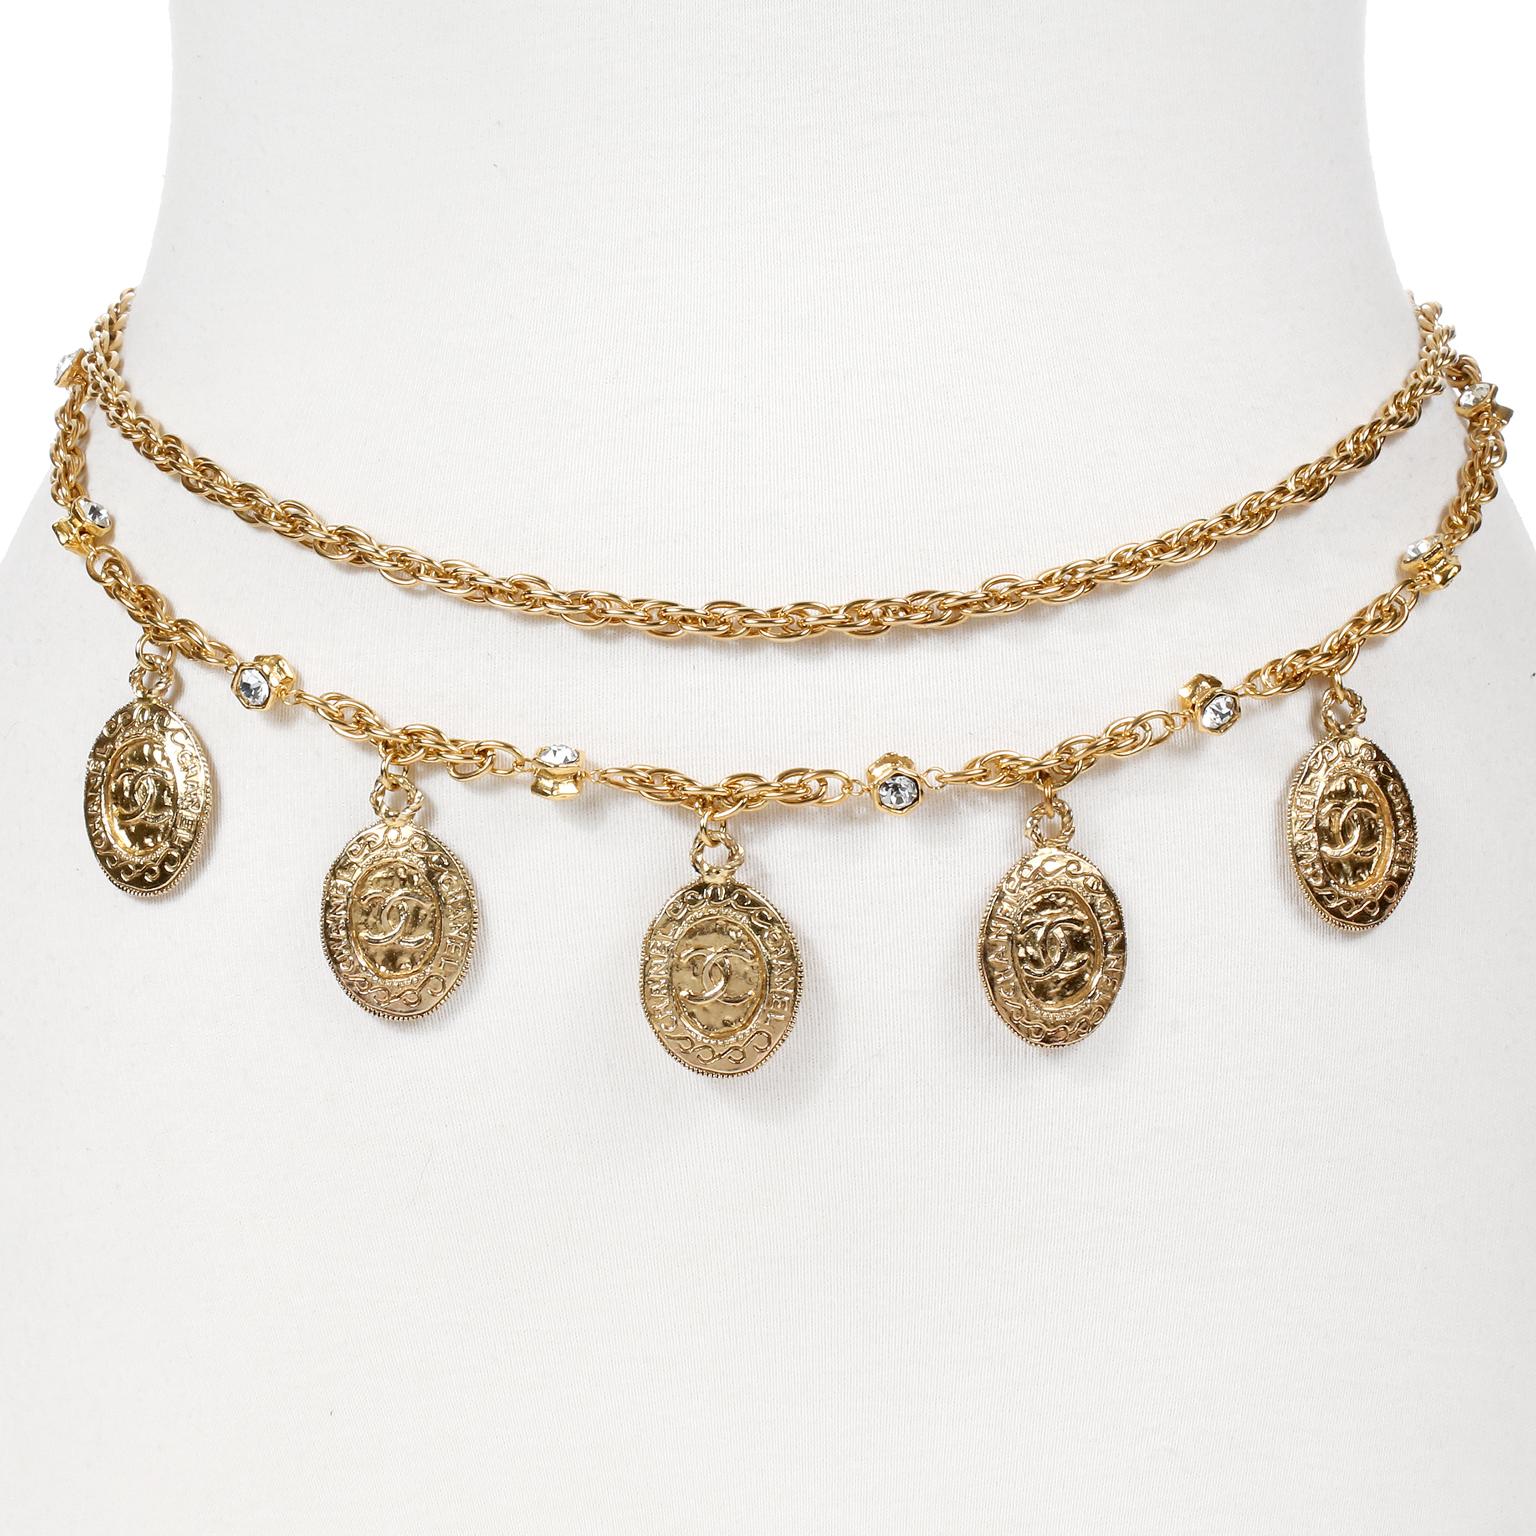 This authentic Chanel Gold Coin and Rock Crystal Necklace Belt is in excellent vintage condition.  Worn in a double layer as a necklace or belt, this classic piece is a must have for any collection.  Five CHANEL engraved CC coins dangle from a gold